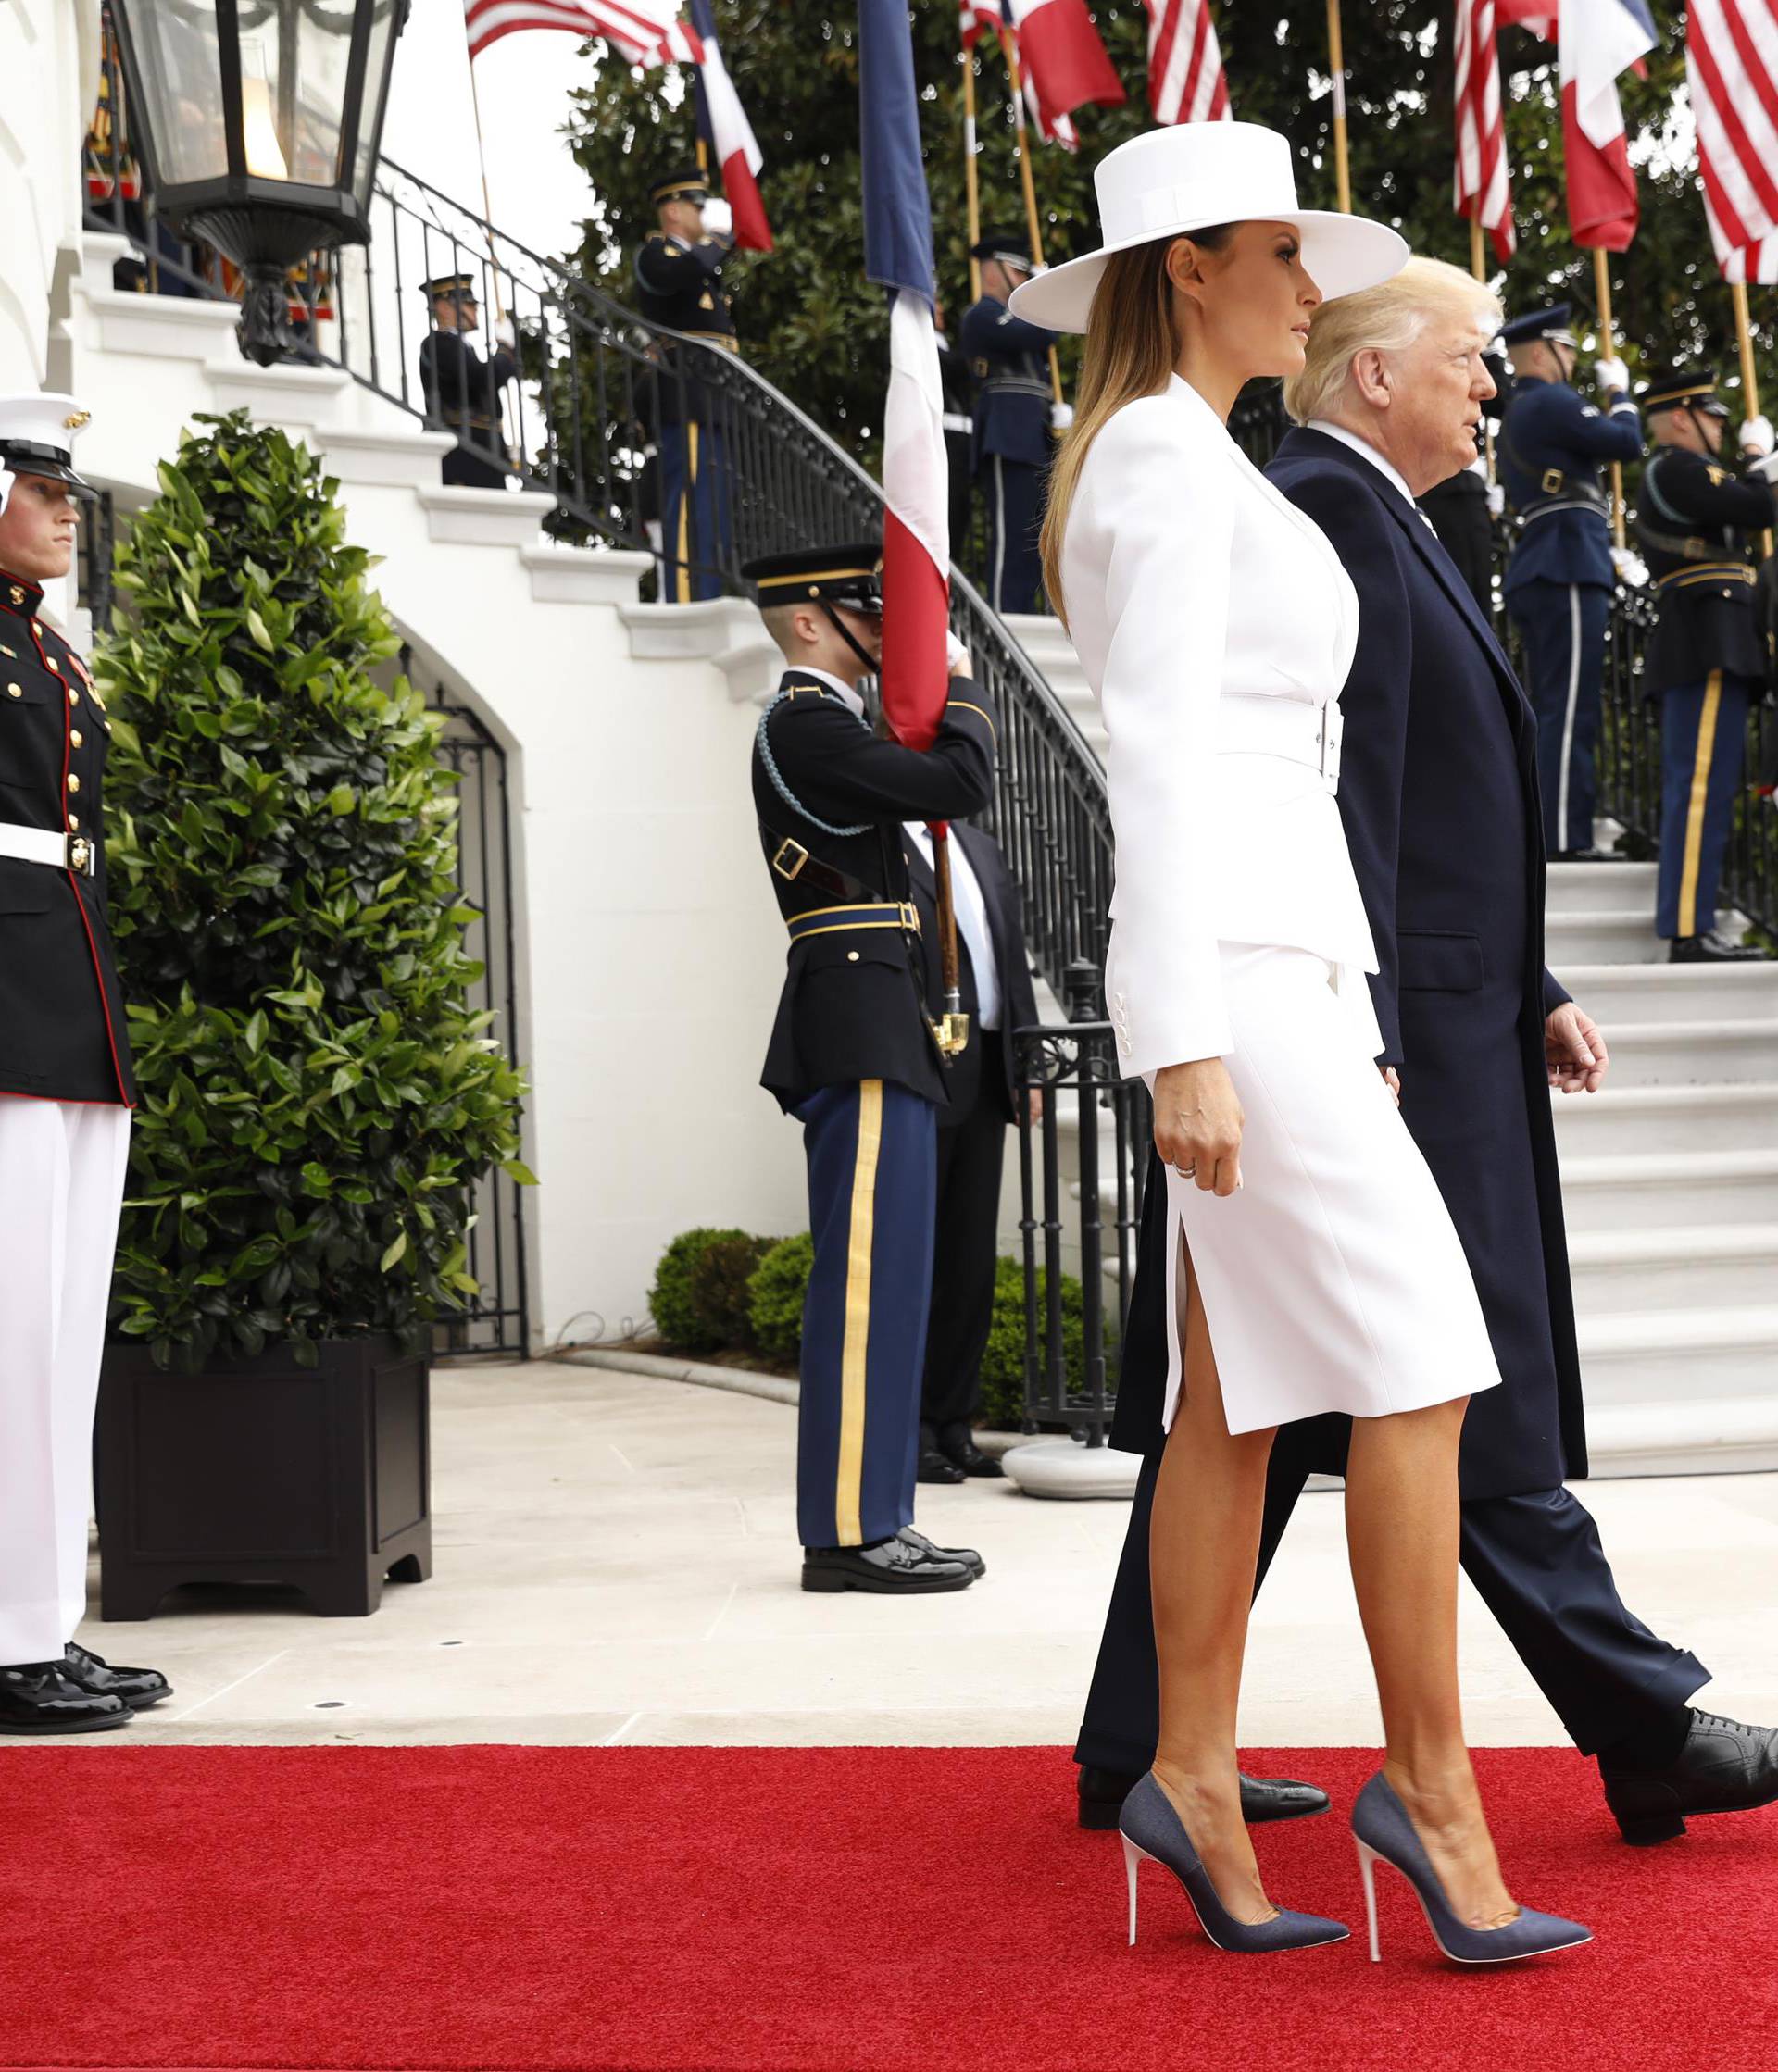 U.S. President Trump welcomes French President Macron during arrival ceremony at the White House in Washington